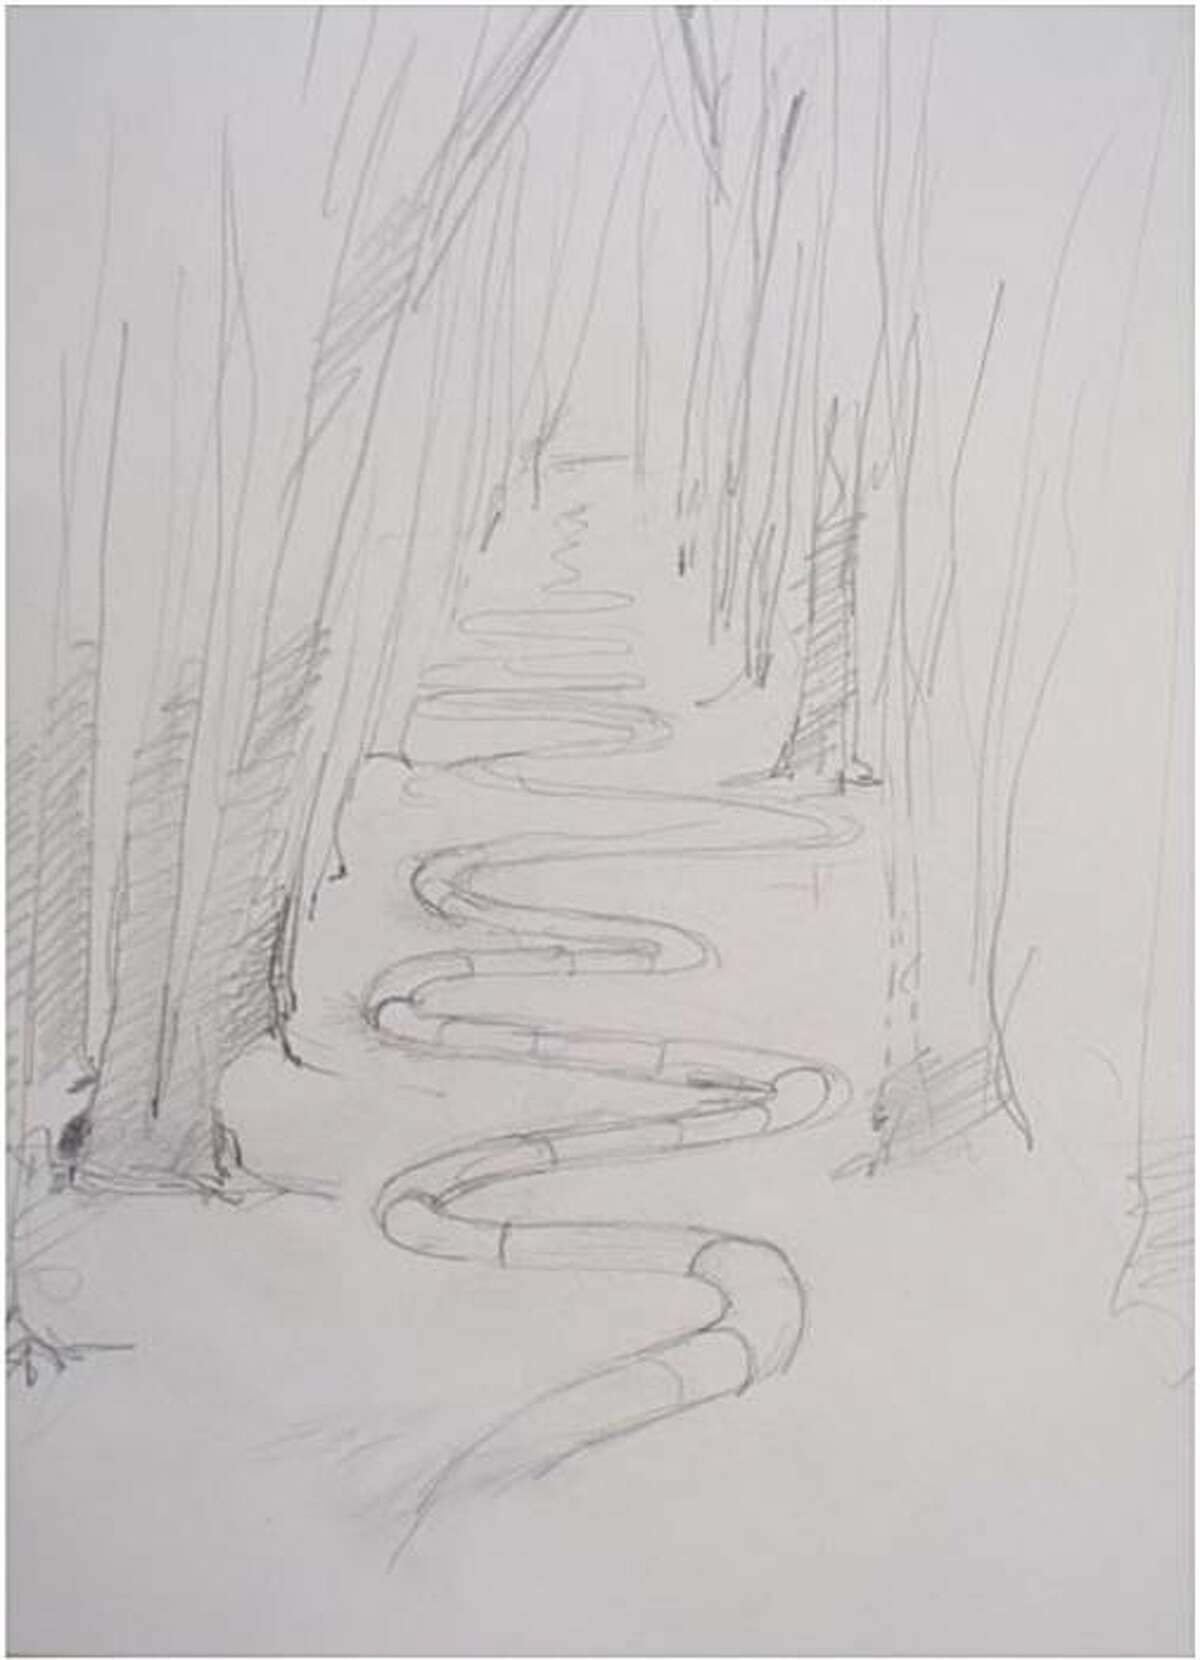 Andy Goldsworthy, a British environmental artist, drew this image for the Presidio Trust to illustrate his conceptual proposal "Wood Line," which would reuse Eucalyptus branches in a horizontal installation extending, in its first phase, 350 feet through a stand of Eucalyptus trees.